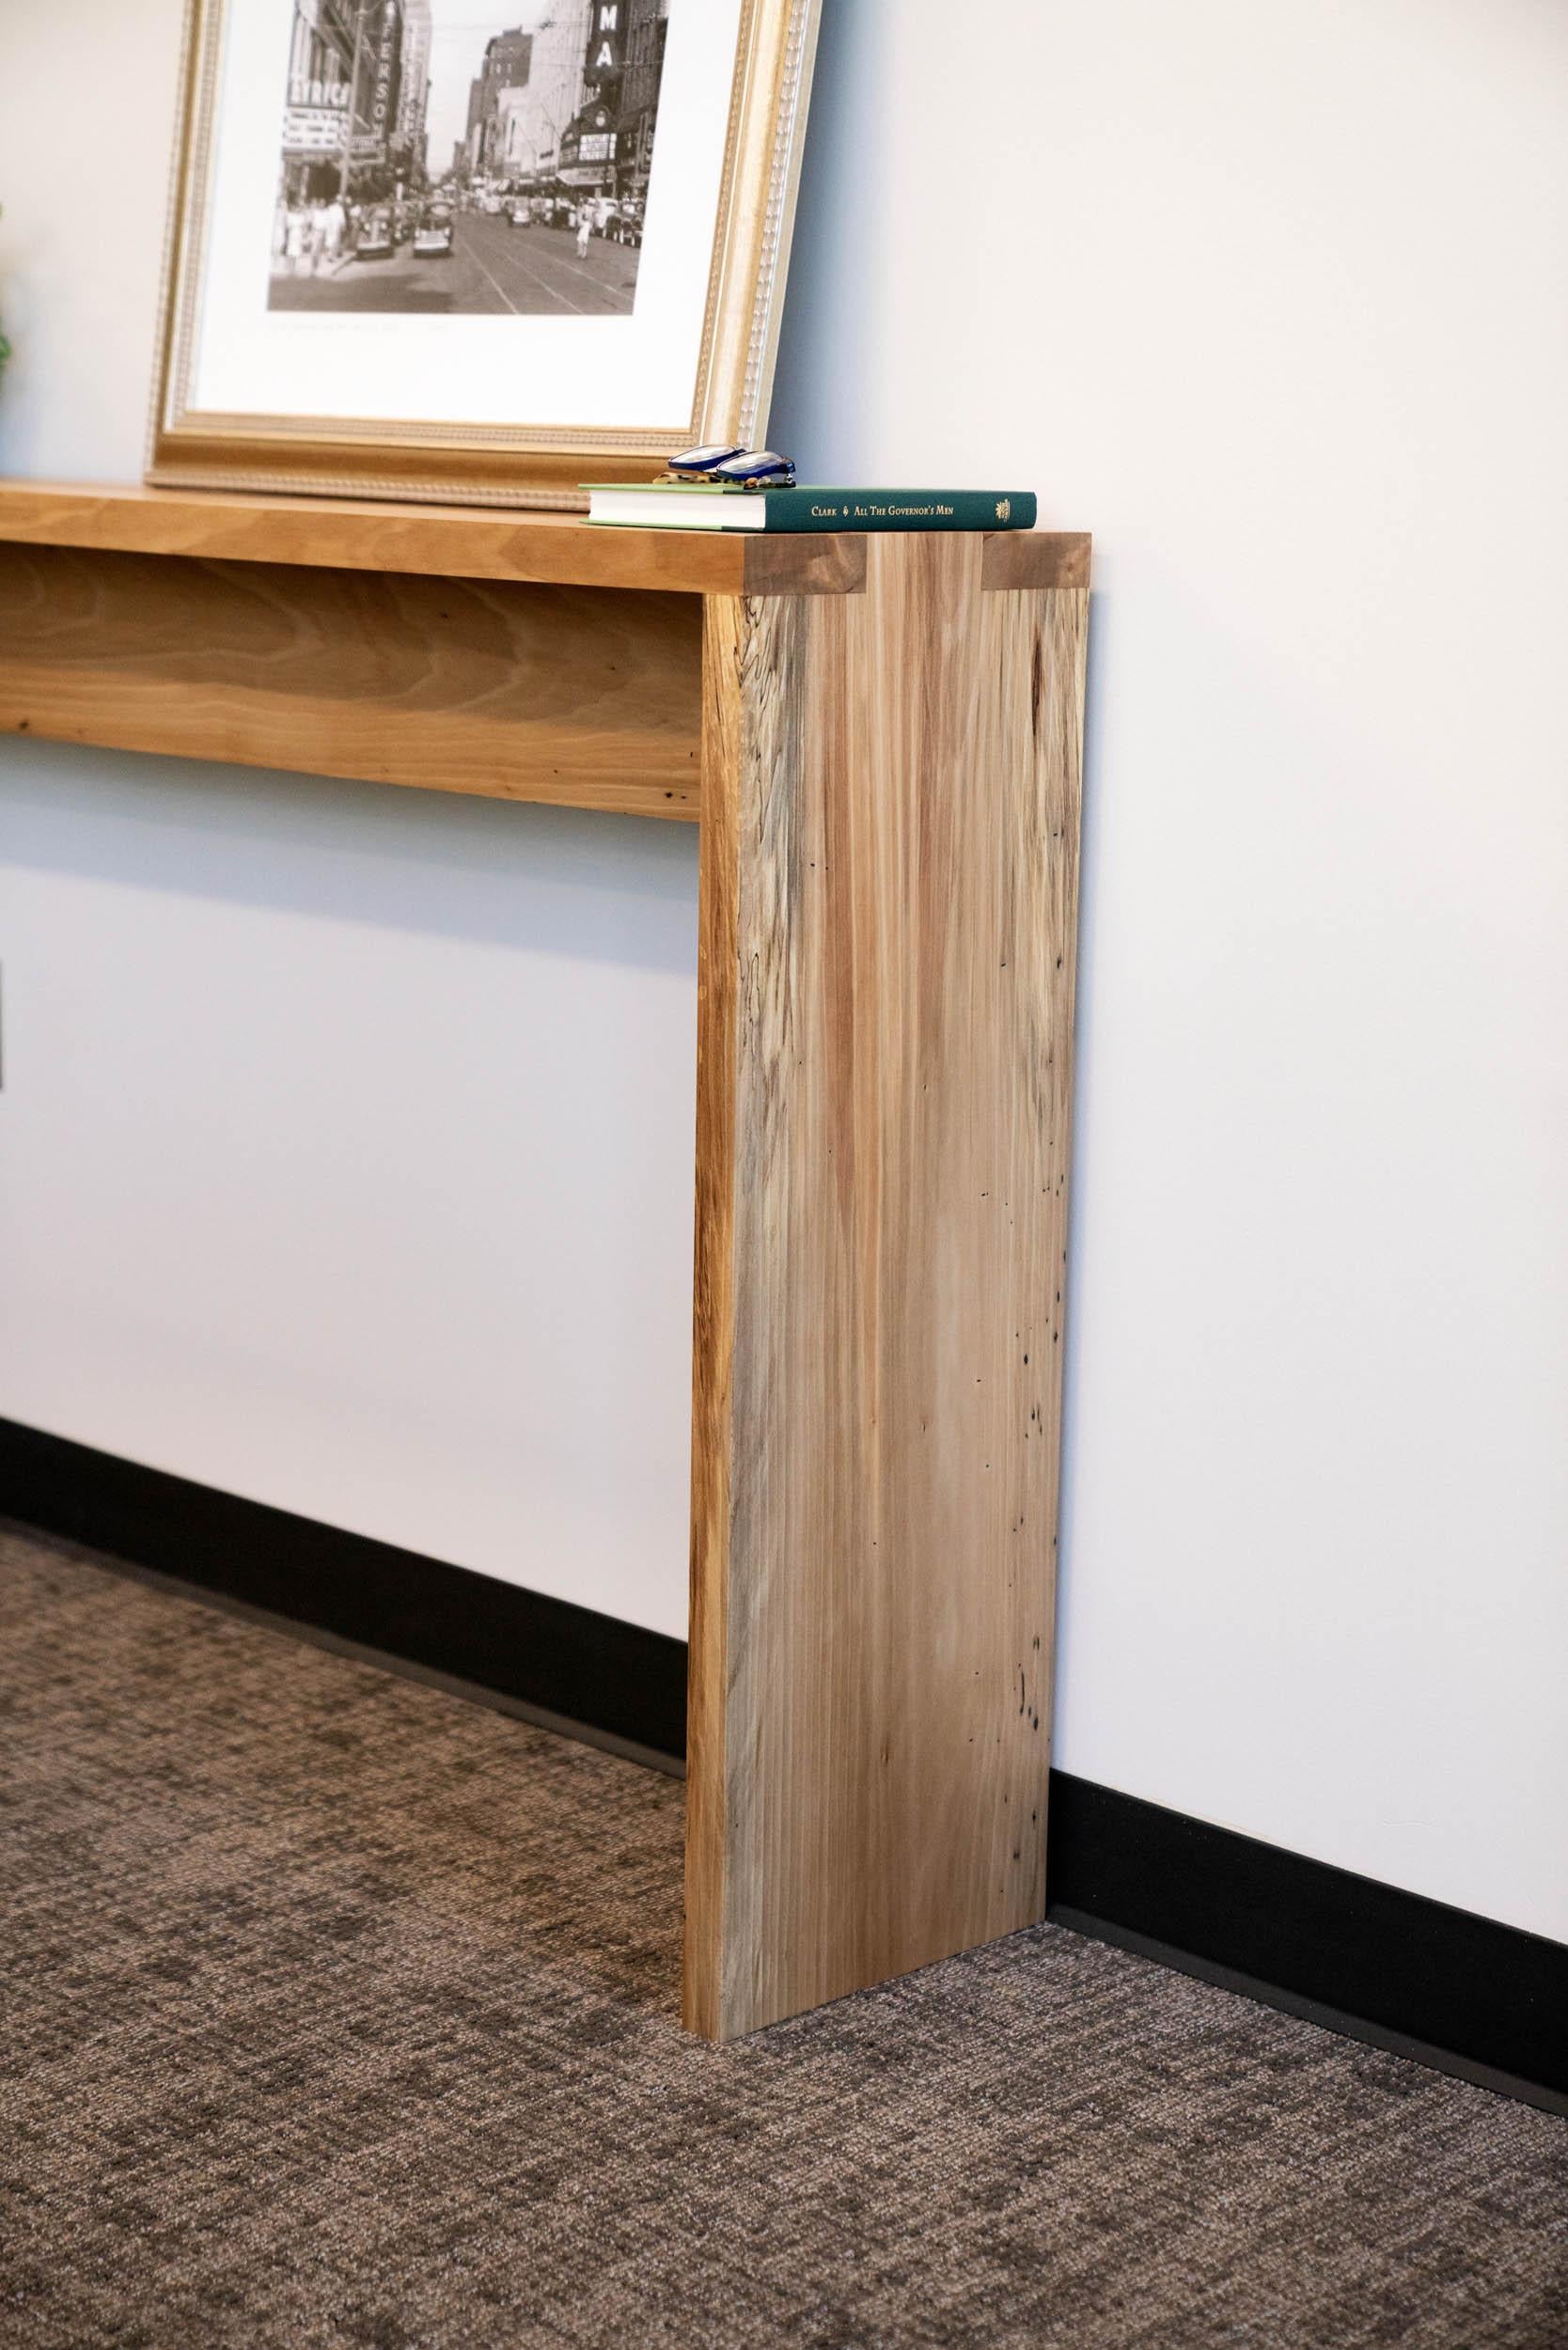 Rustic yet refined with air-tight box joints, our Spider Console Table is handcrafted by Alabama Sawyer from Alabama urban Sweet Gum trees. Often referred to as 